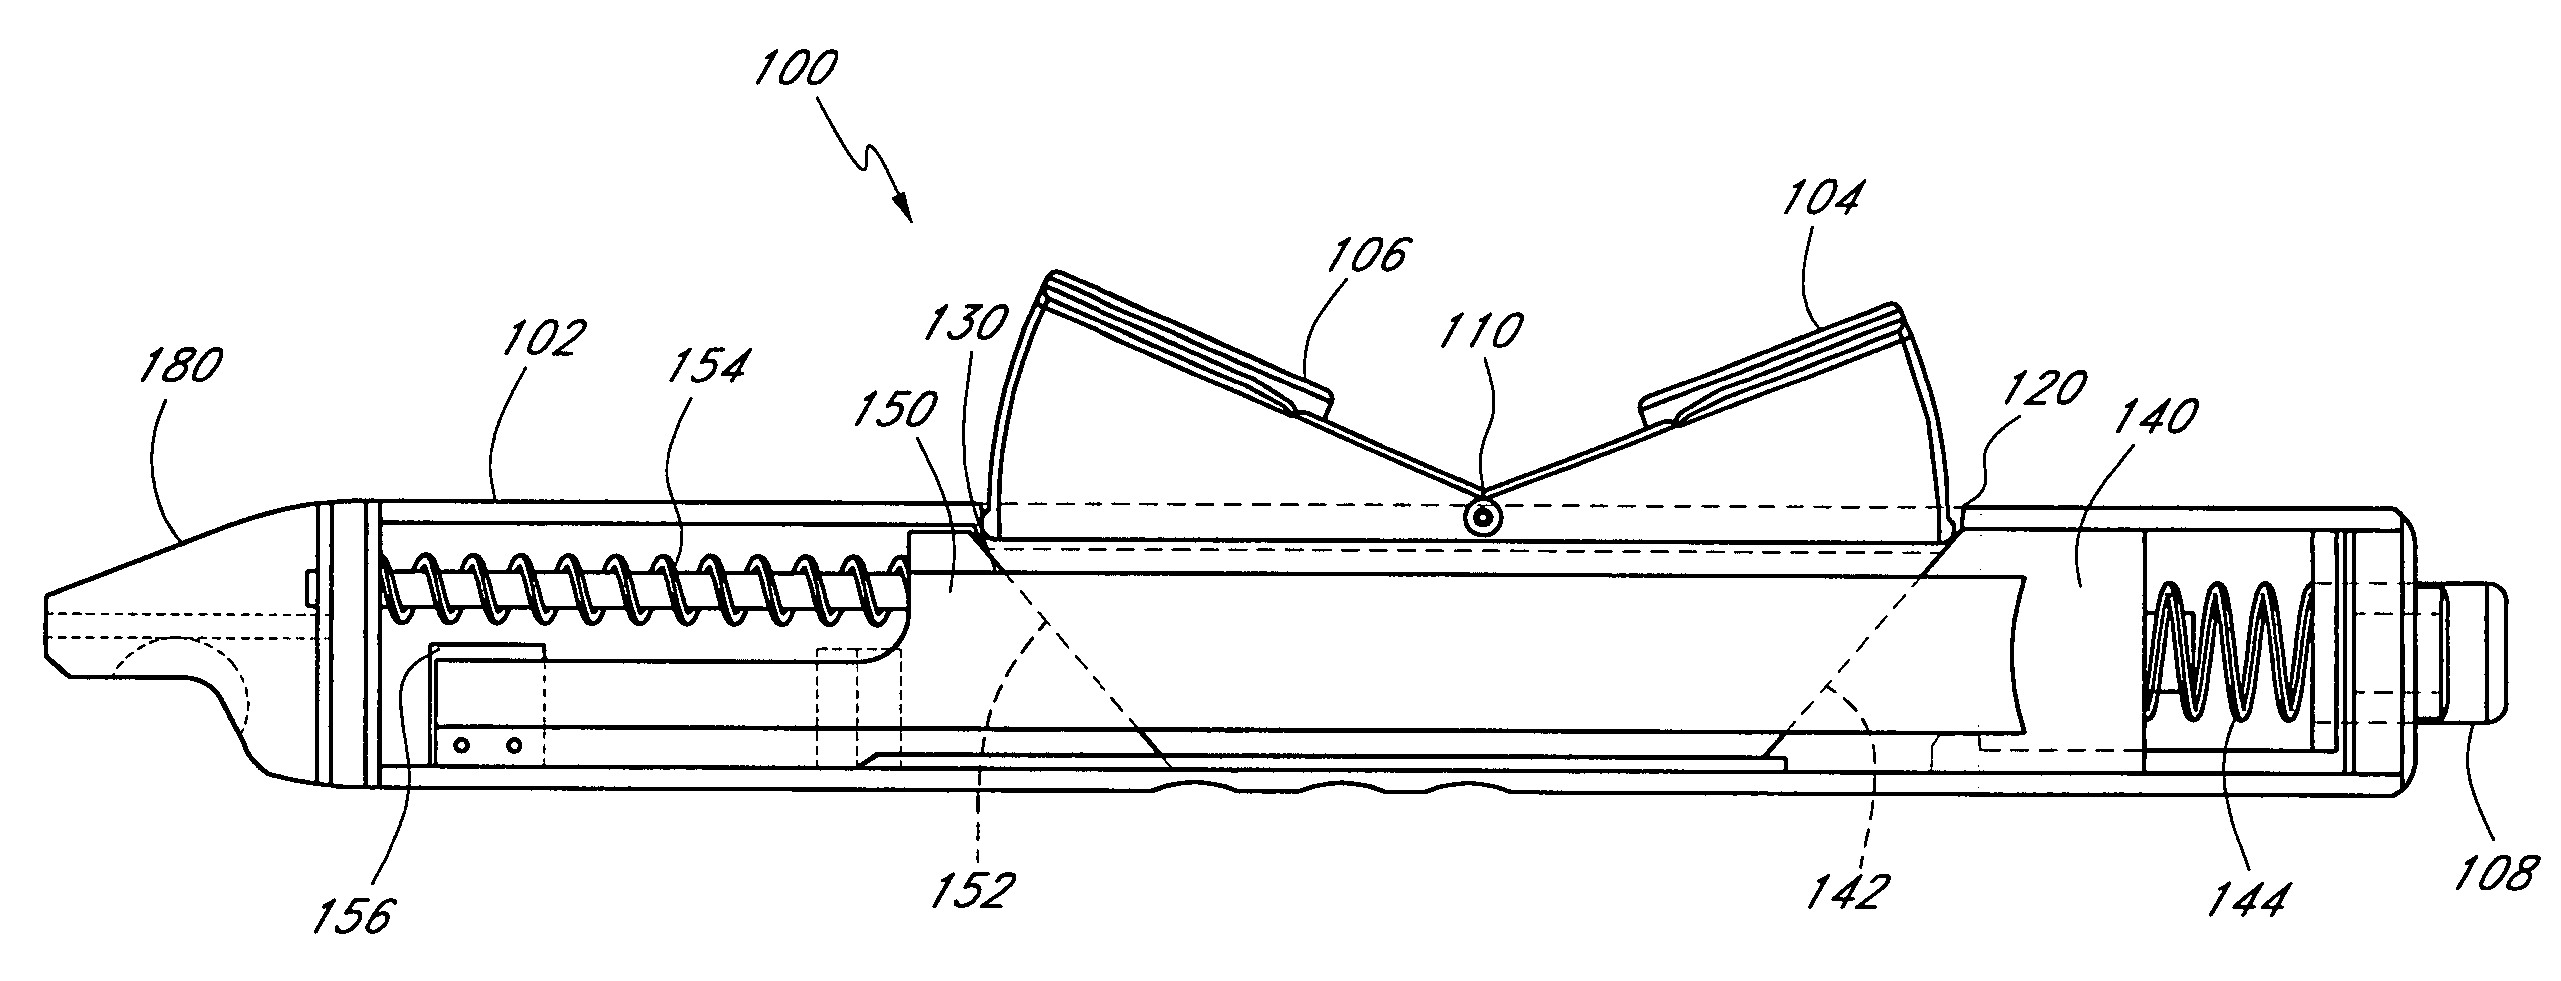 Handle for suturing apparatus